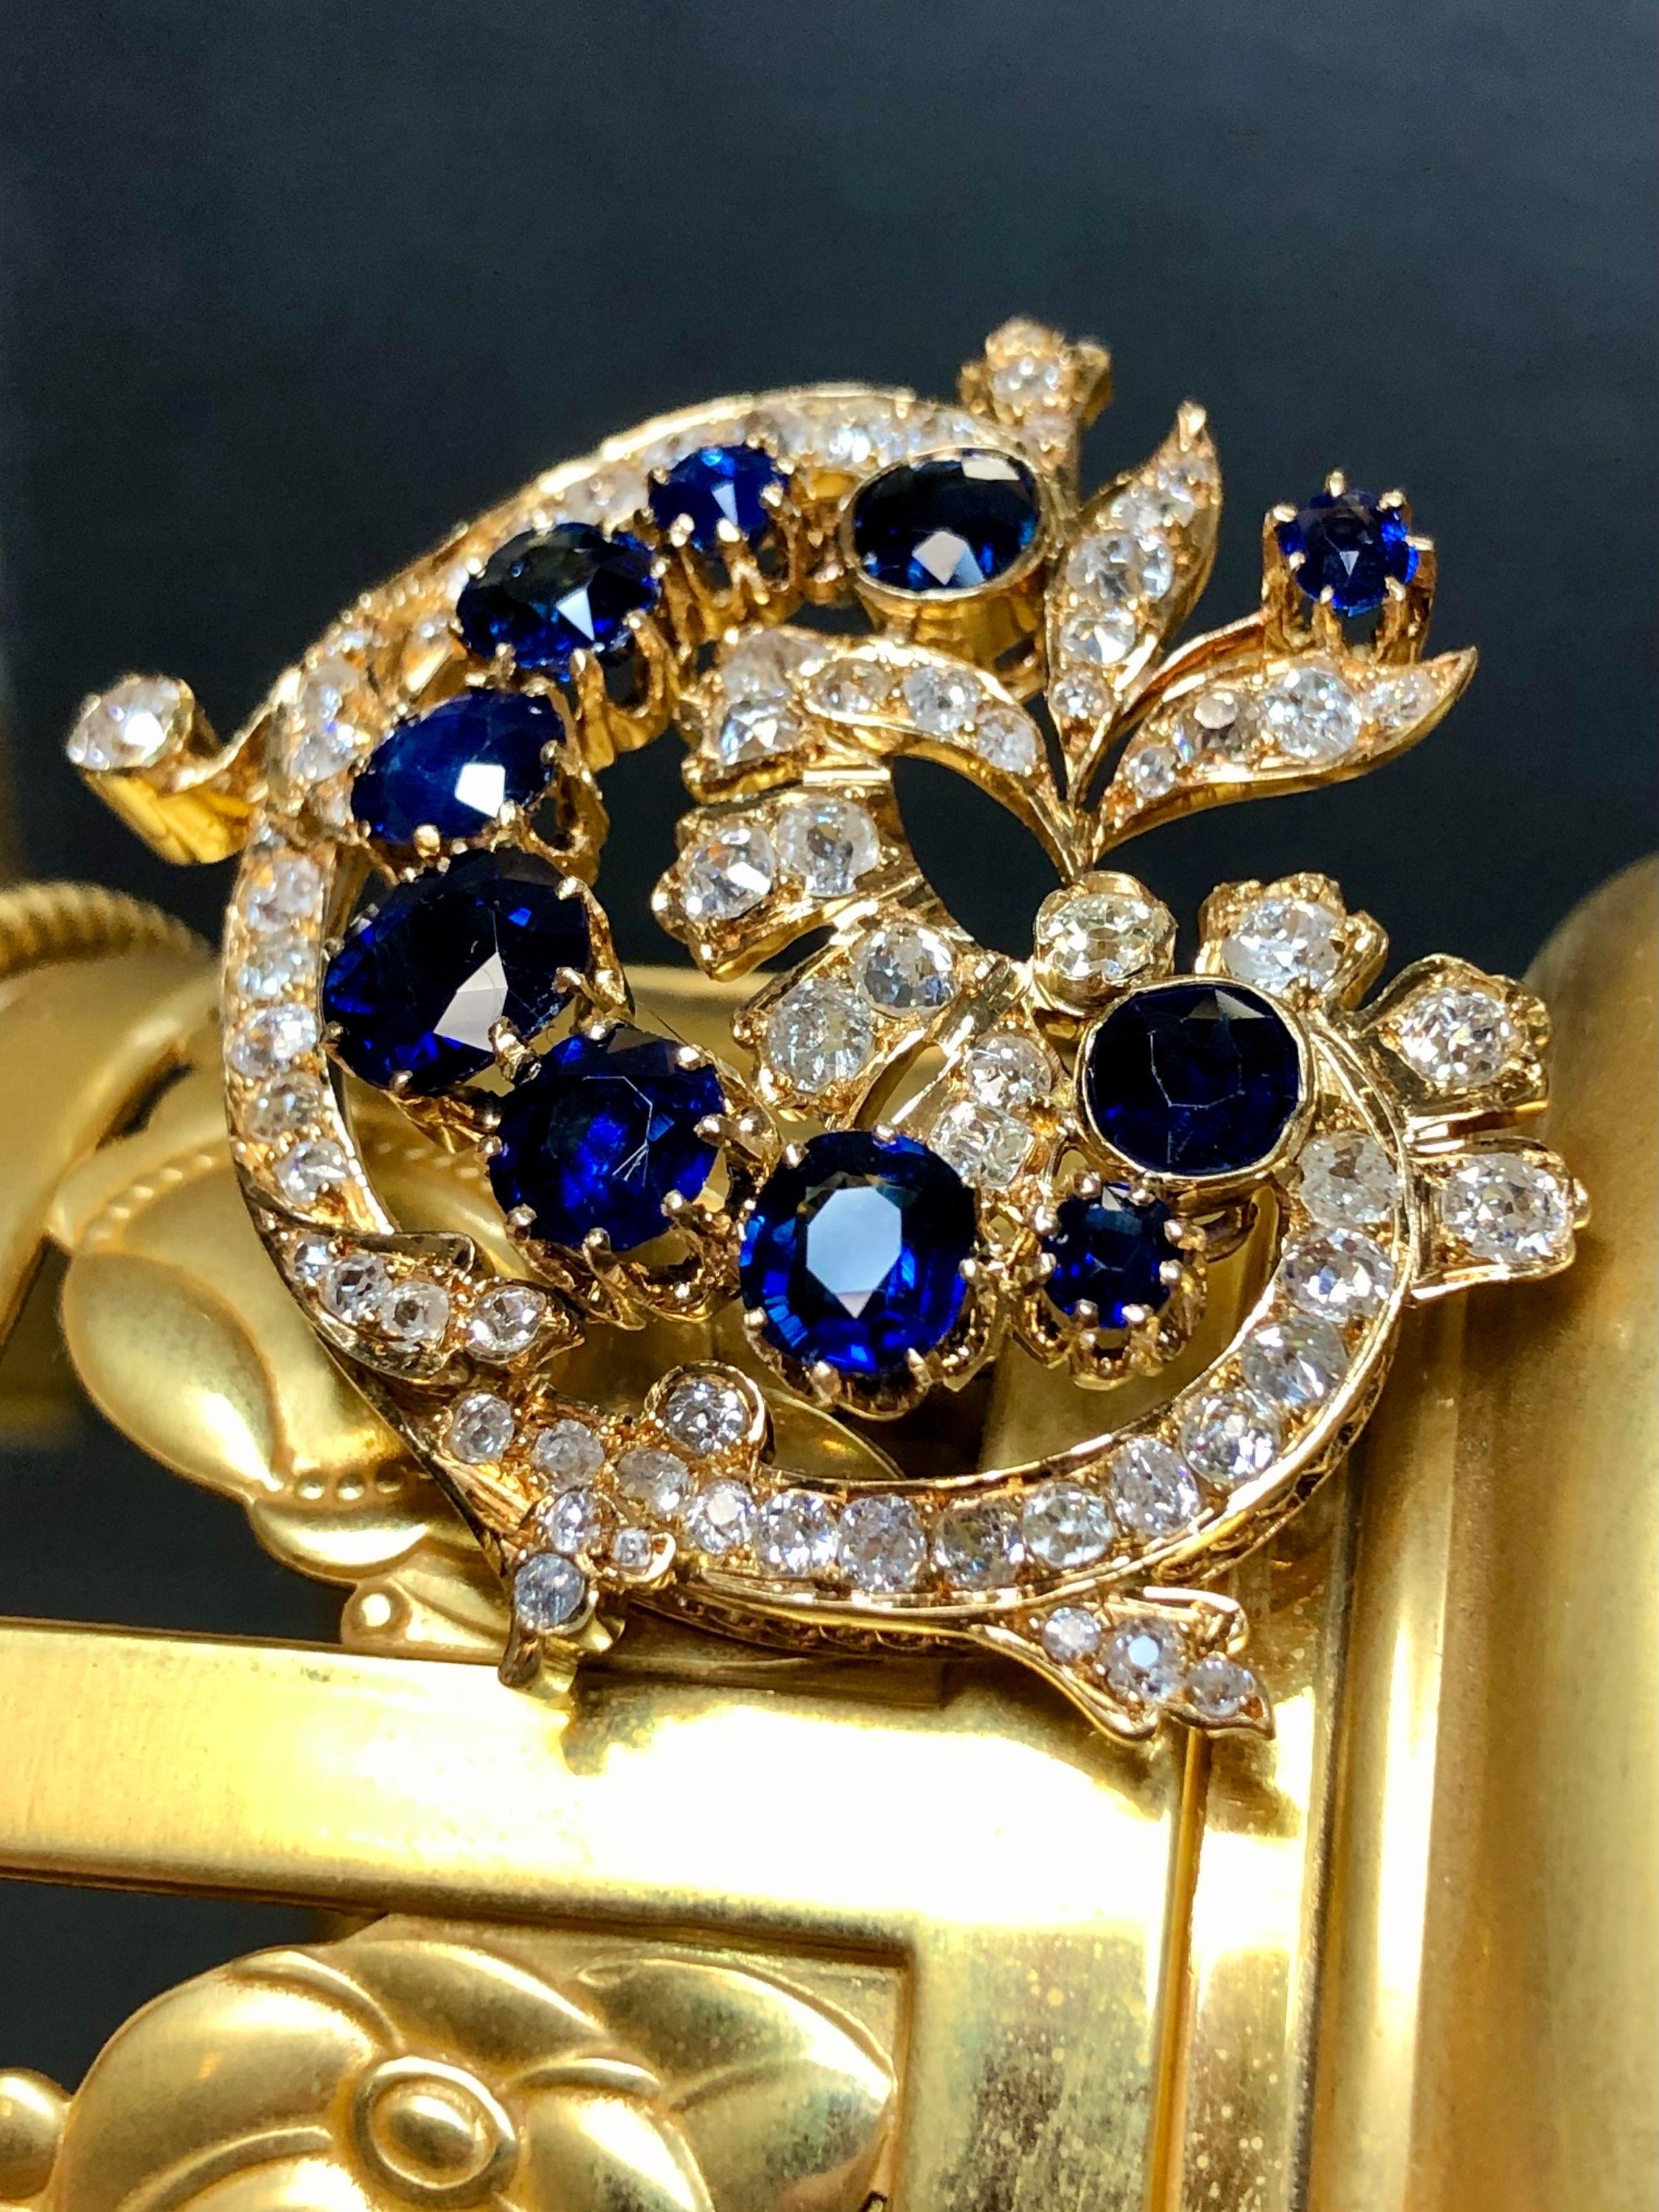 An exquisite example of true antiquity, this original Victorian era brooch has been done in 18K yellow gold (which is extremely unusual for the period) and set with approximately 5cttw in original old mine cut diamonds and 8cttw in natural NO HEAT